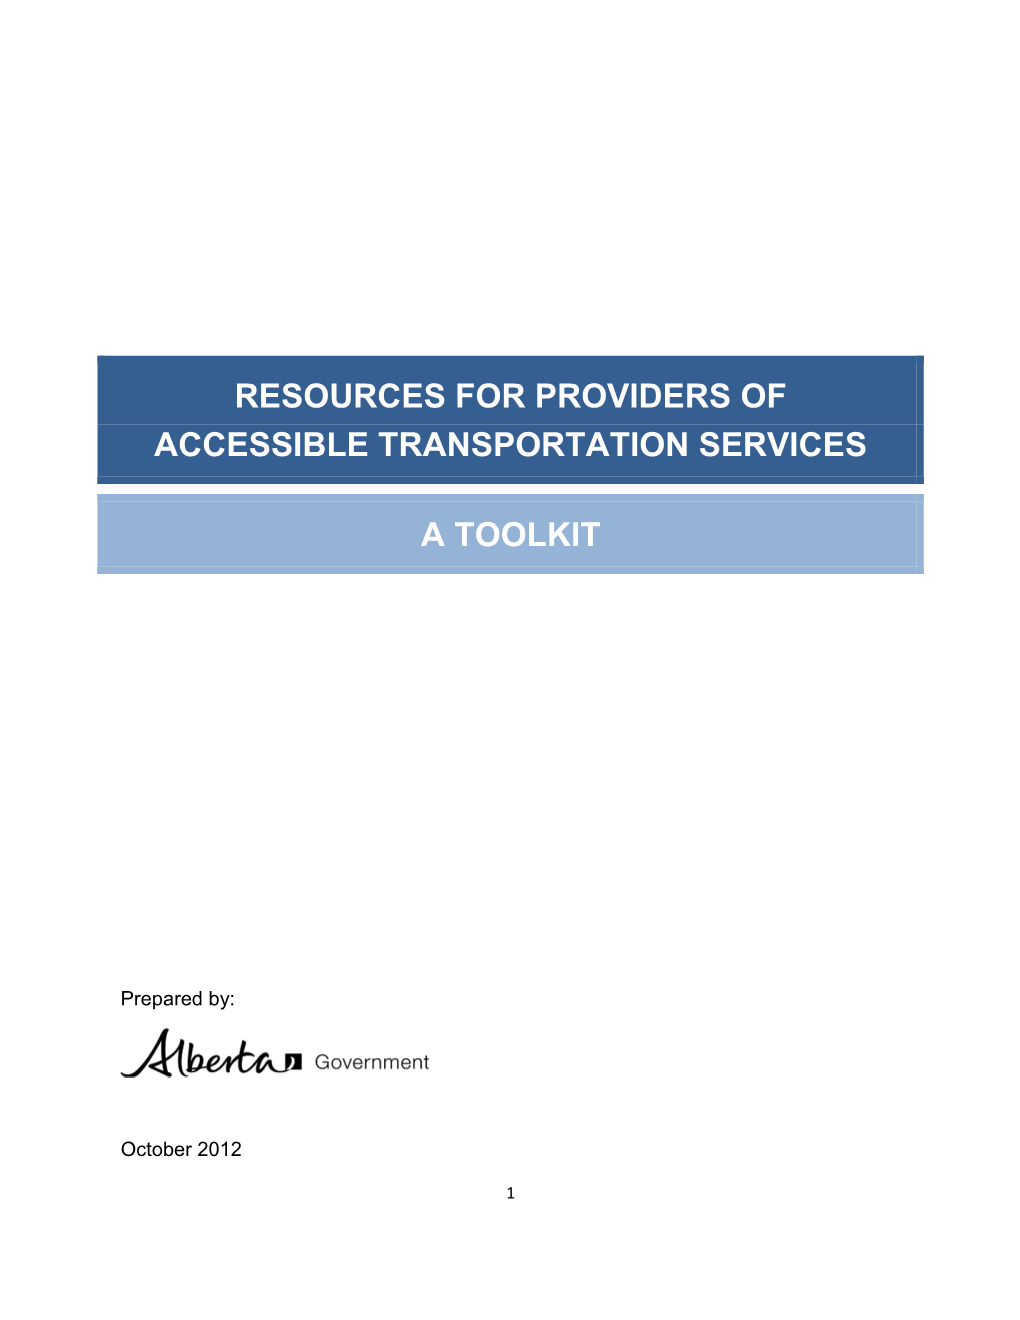 Resources for Providers of Accessible Transportation Services